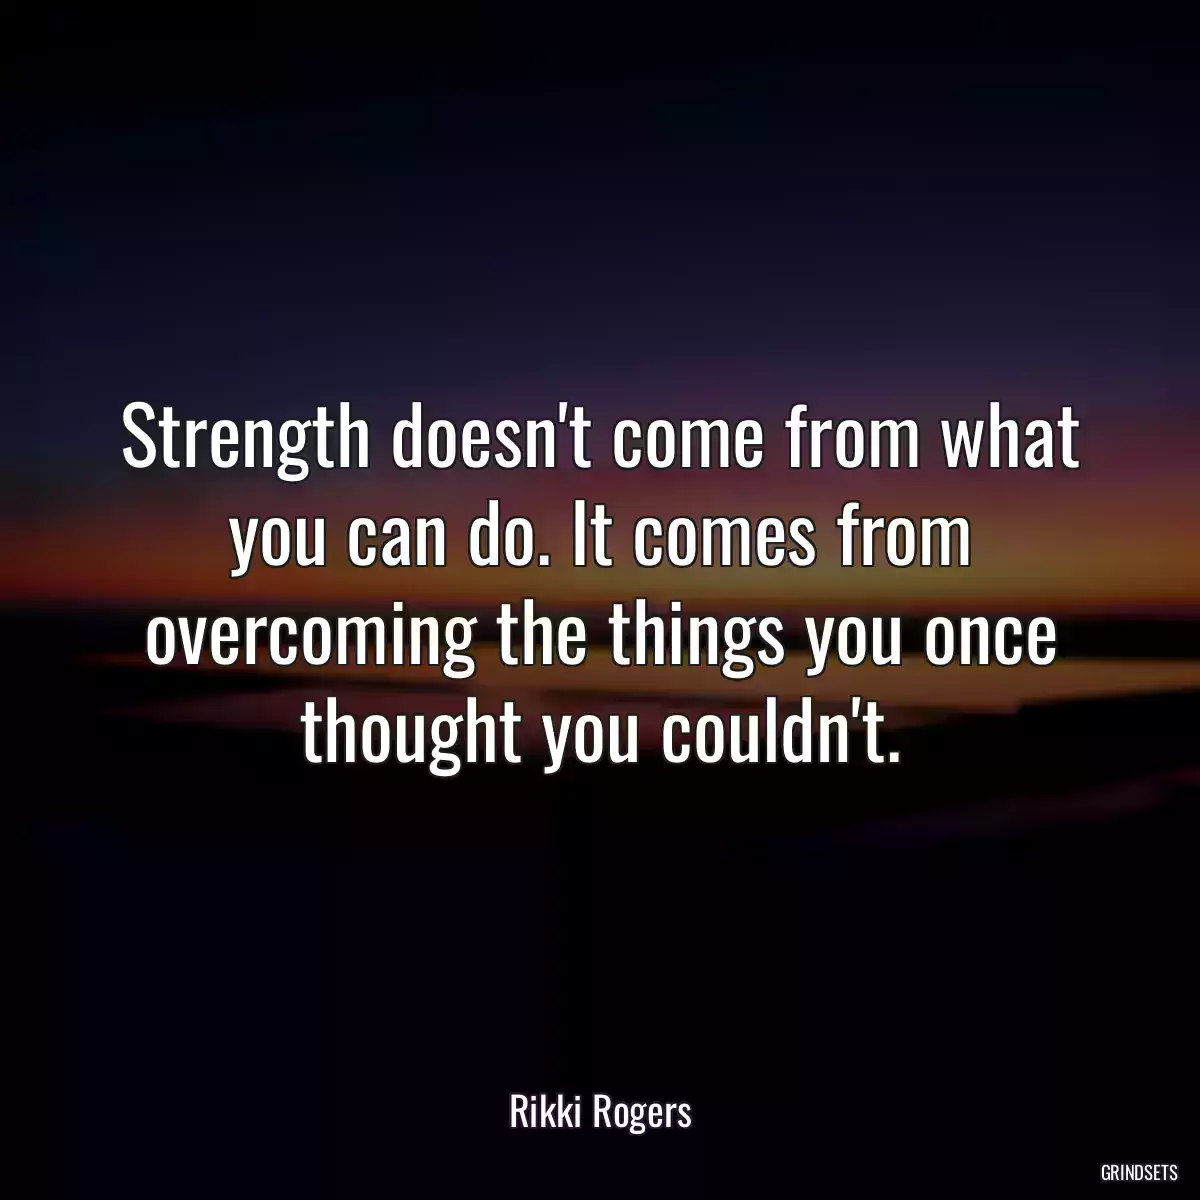 Strength doesn\'t come from what you can do. It comes from overcoming the things you once thought you couldn\'t.